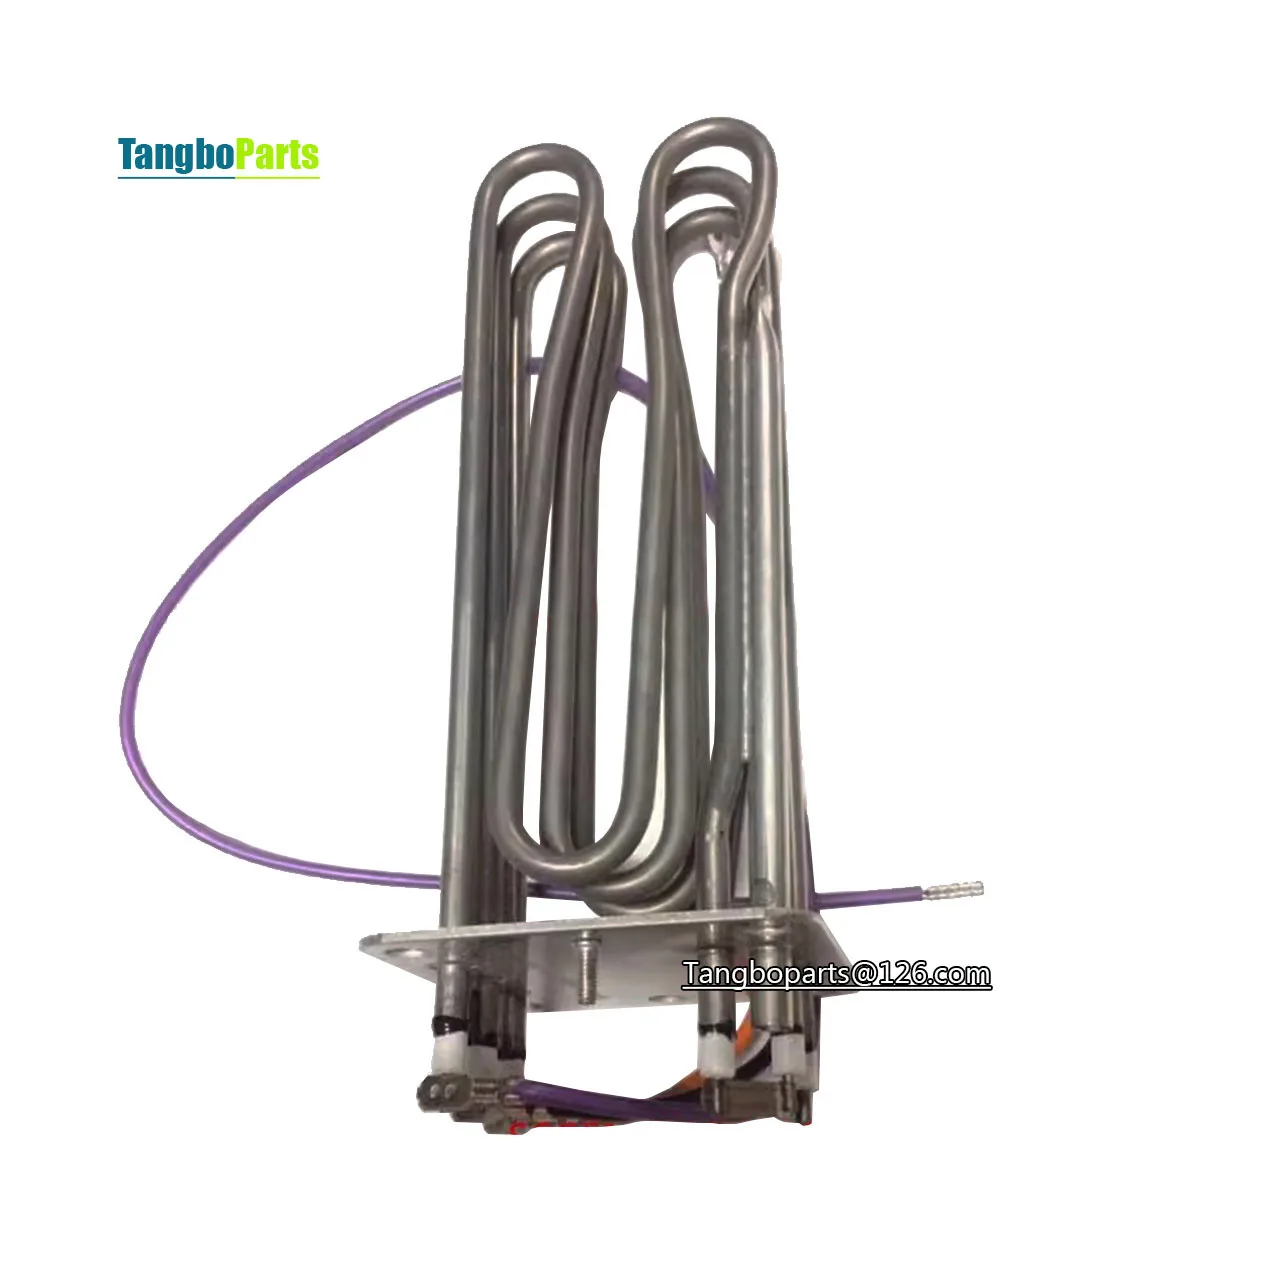 

Steam Oven Accessories Water Tank Heating Tube 9000W Heating Wire Heater For Rational SCC61 101 Steam Oven Replacement